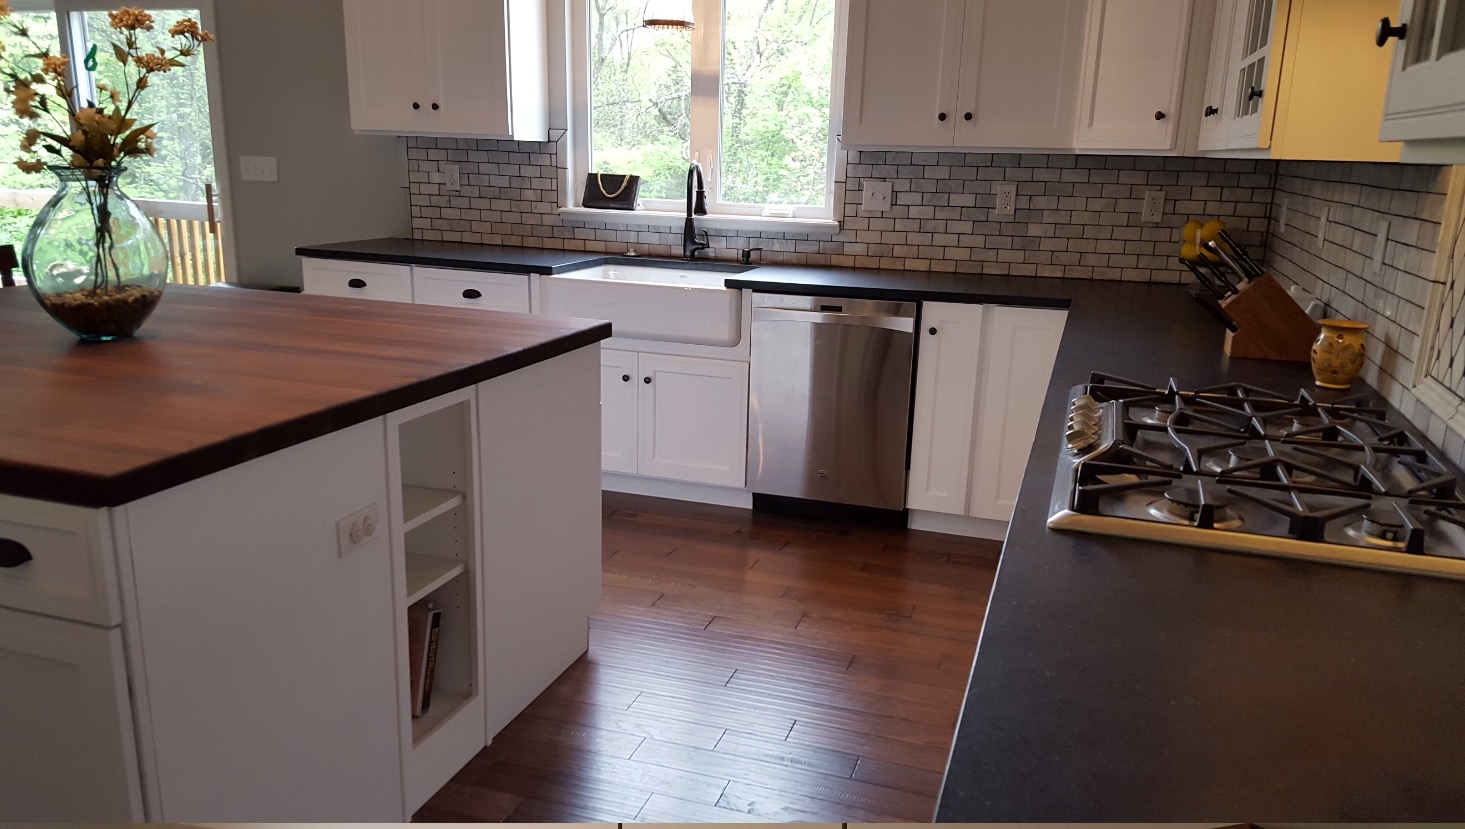 Soapstone kitchen countertops with a butcher block island in st. louis